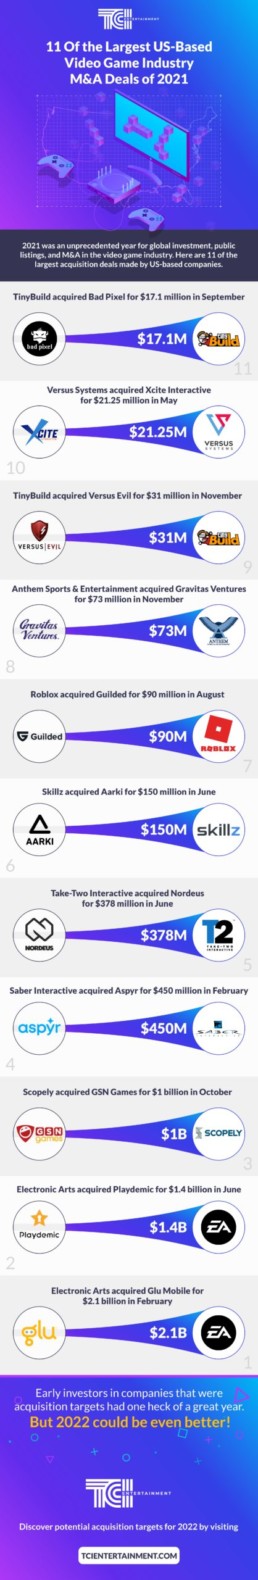 11 Of the Largest US-Based Video Game Industry M&A Deals of 2021